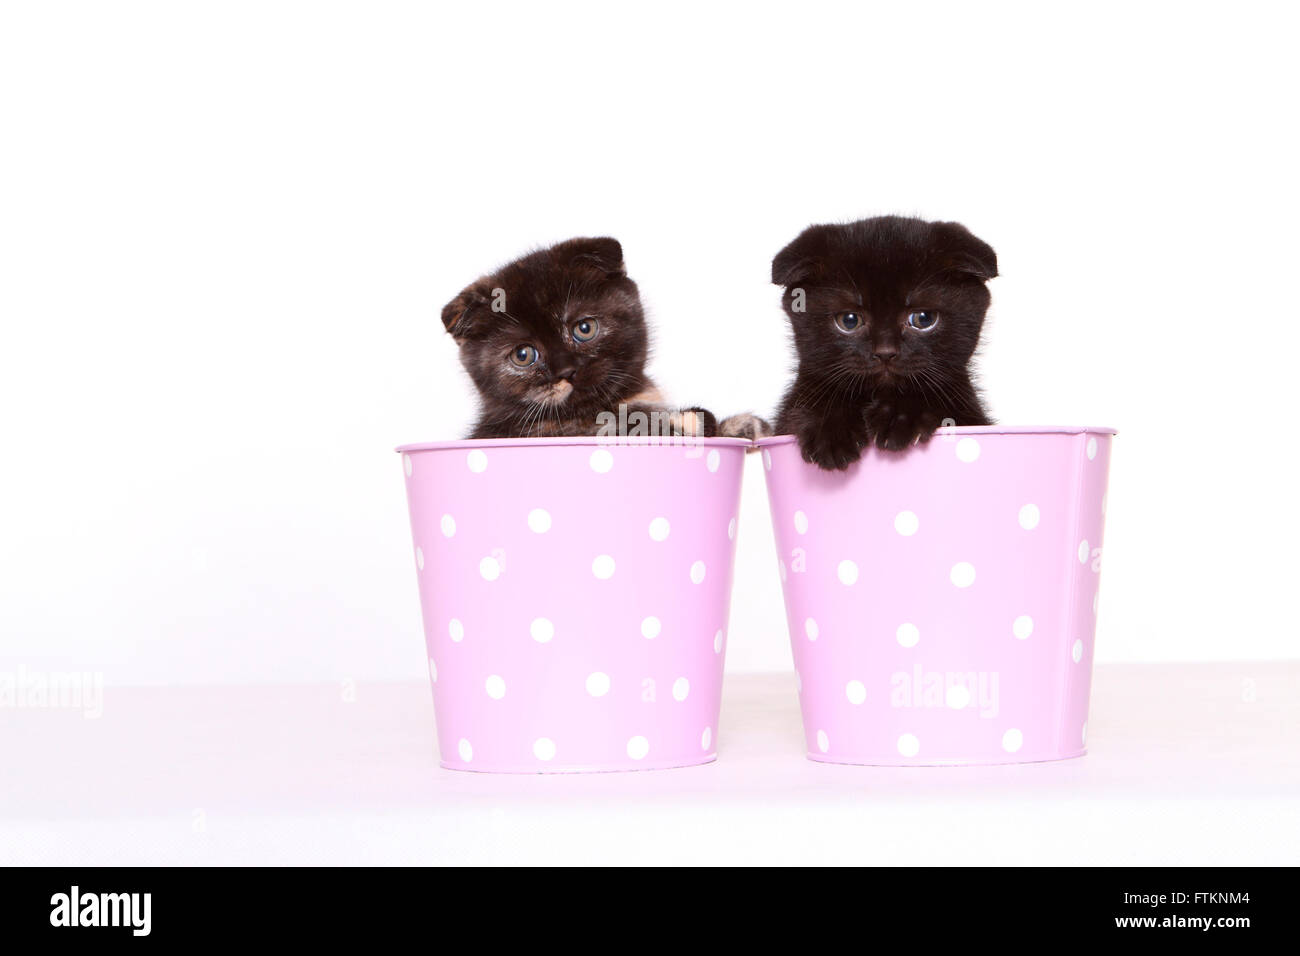 Scottish Fold. Two kittens (6 weeks old) in pink pots with polka dots. Studio picture against a white background. Germany Stock Photo